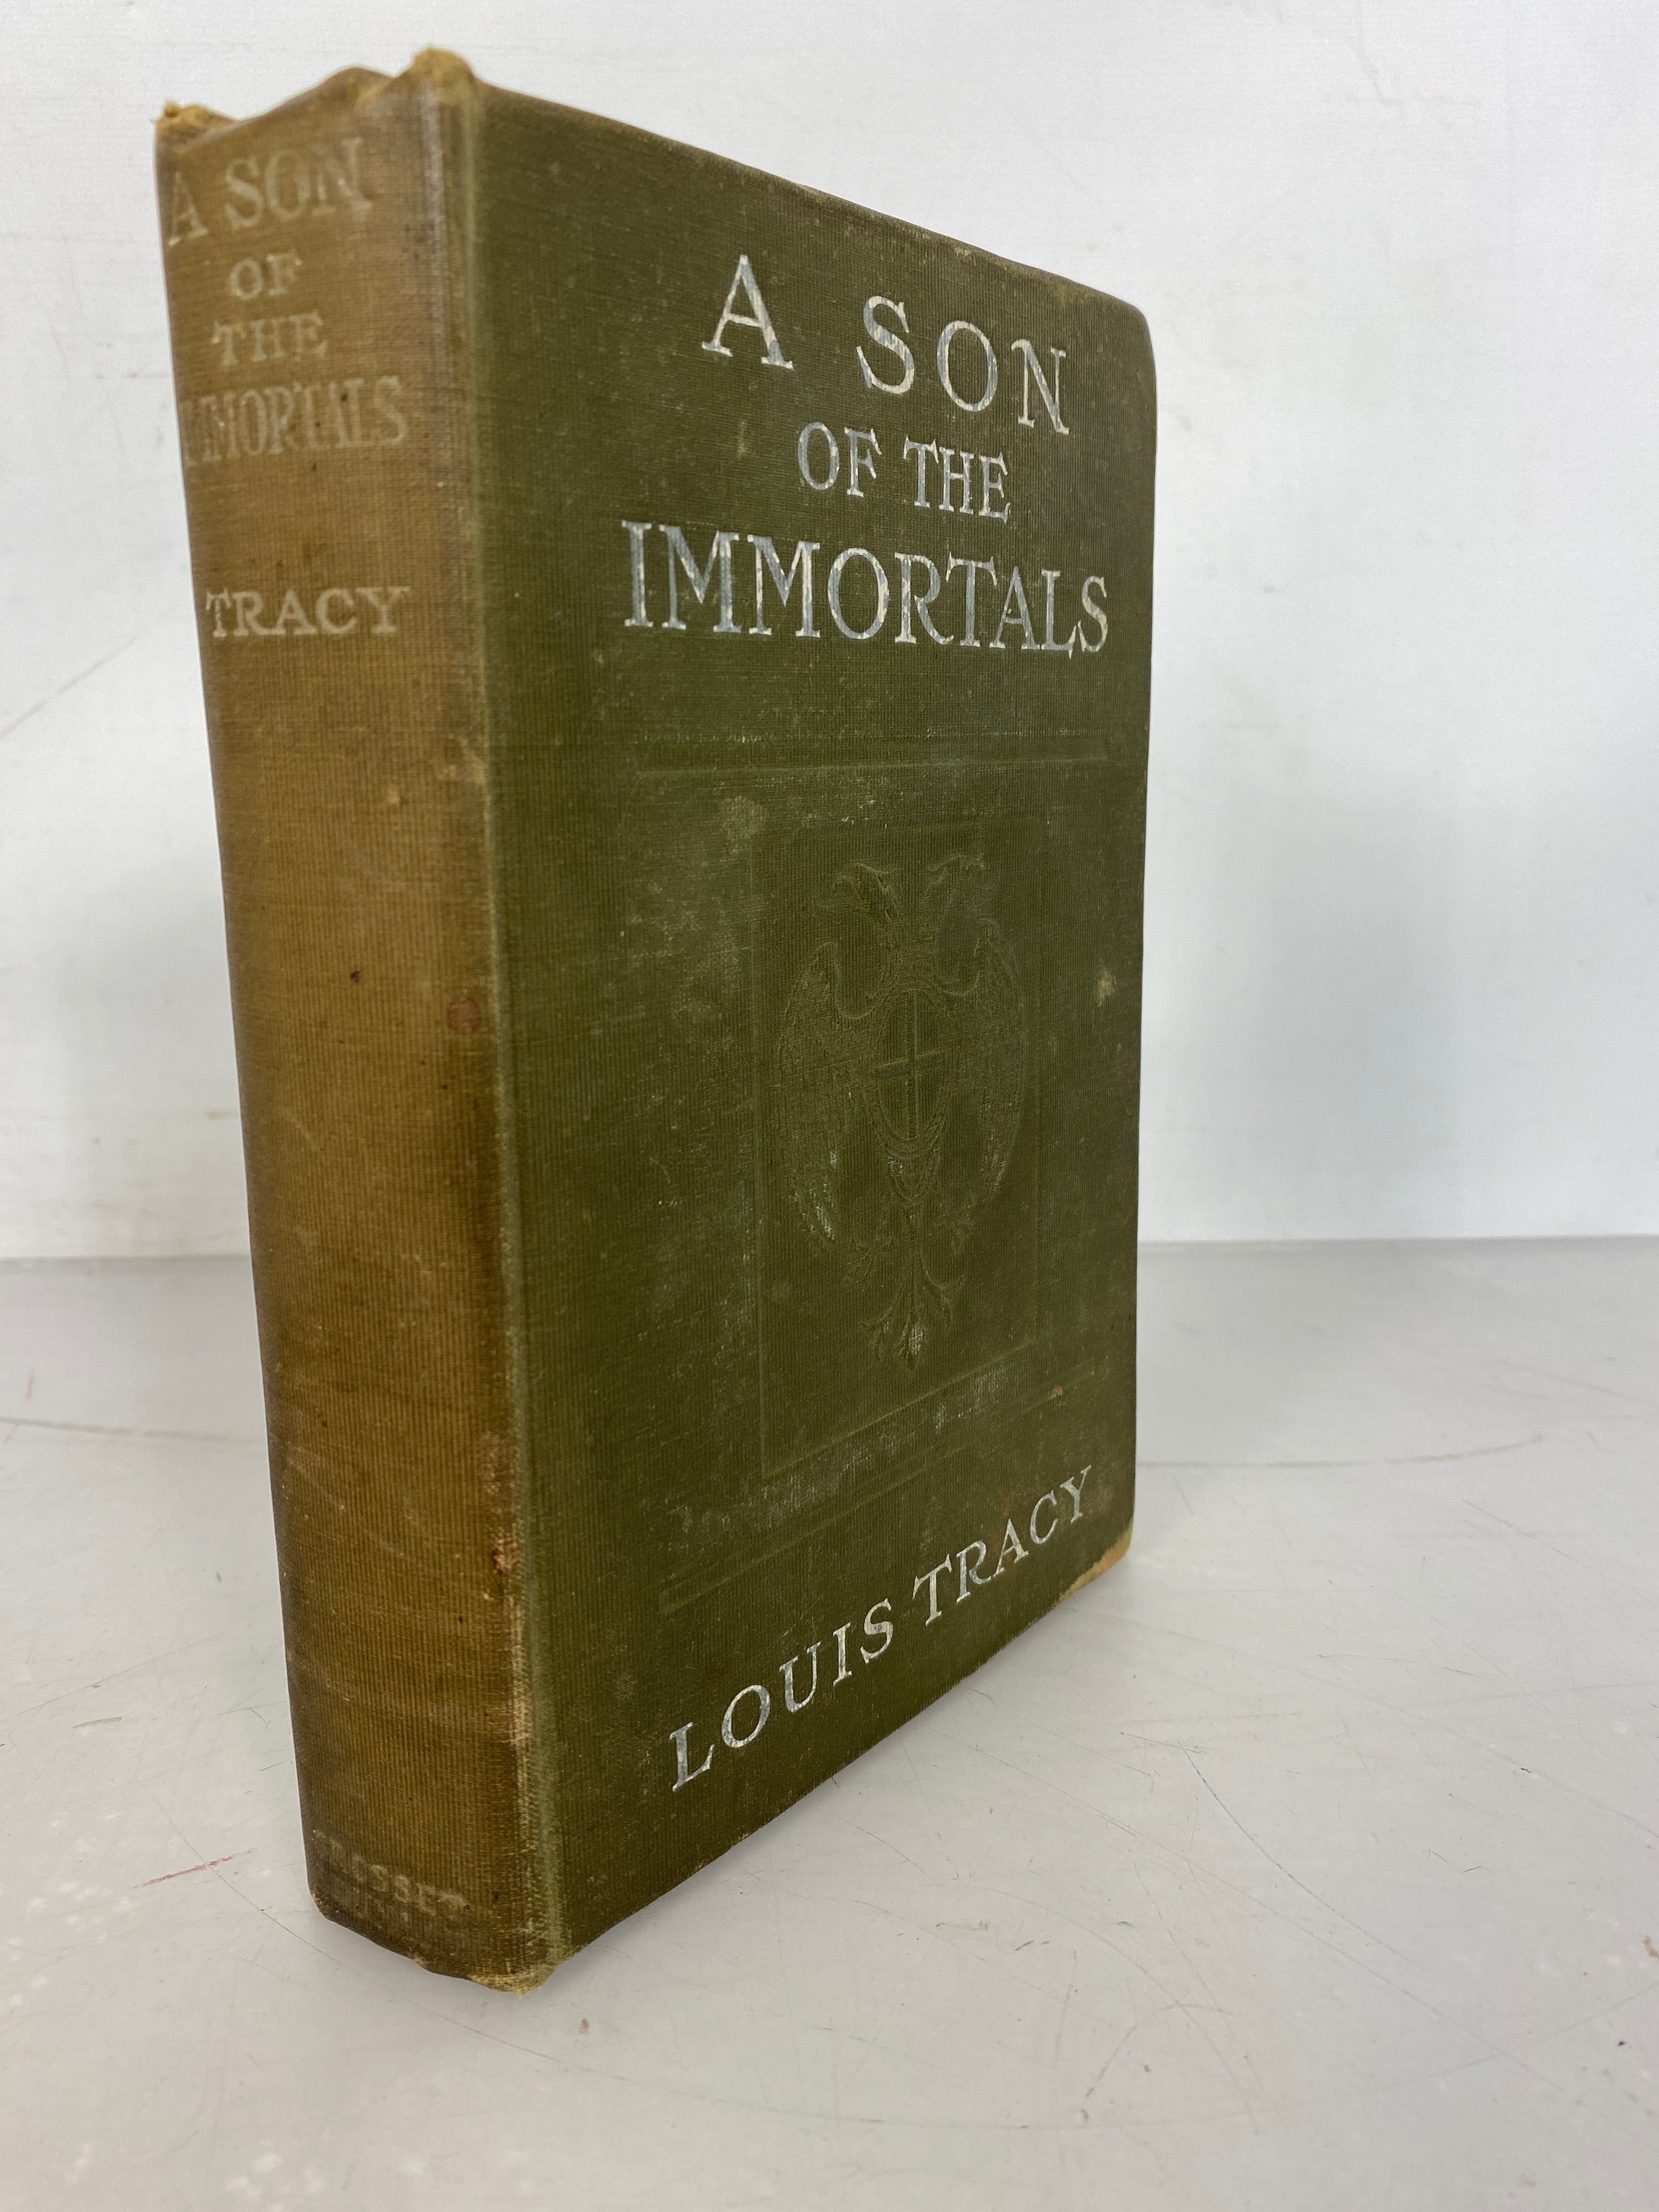 A Son of the Immortals by Louis Tracy 1909 HC